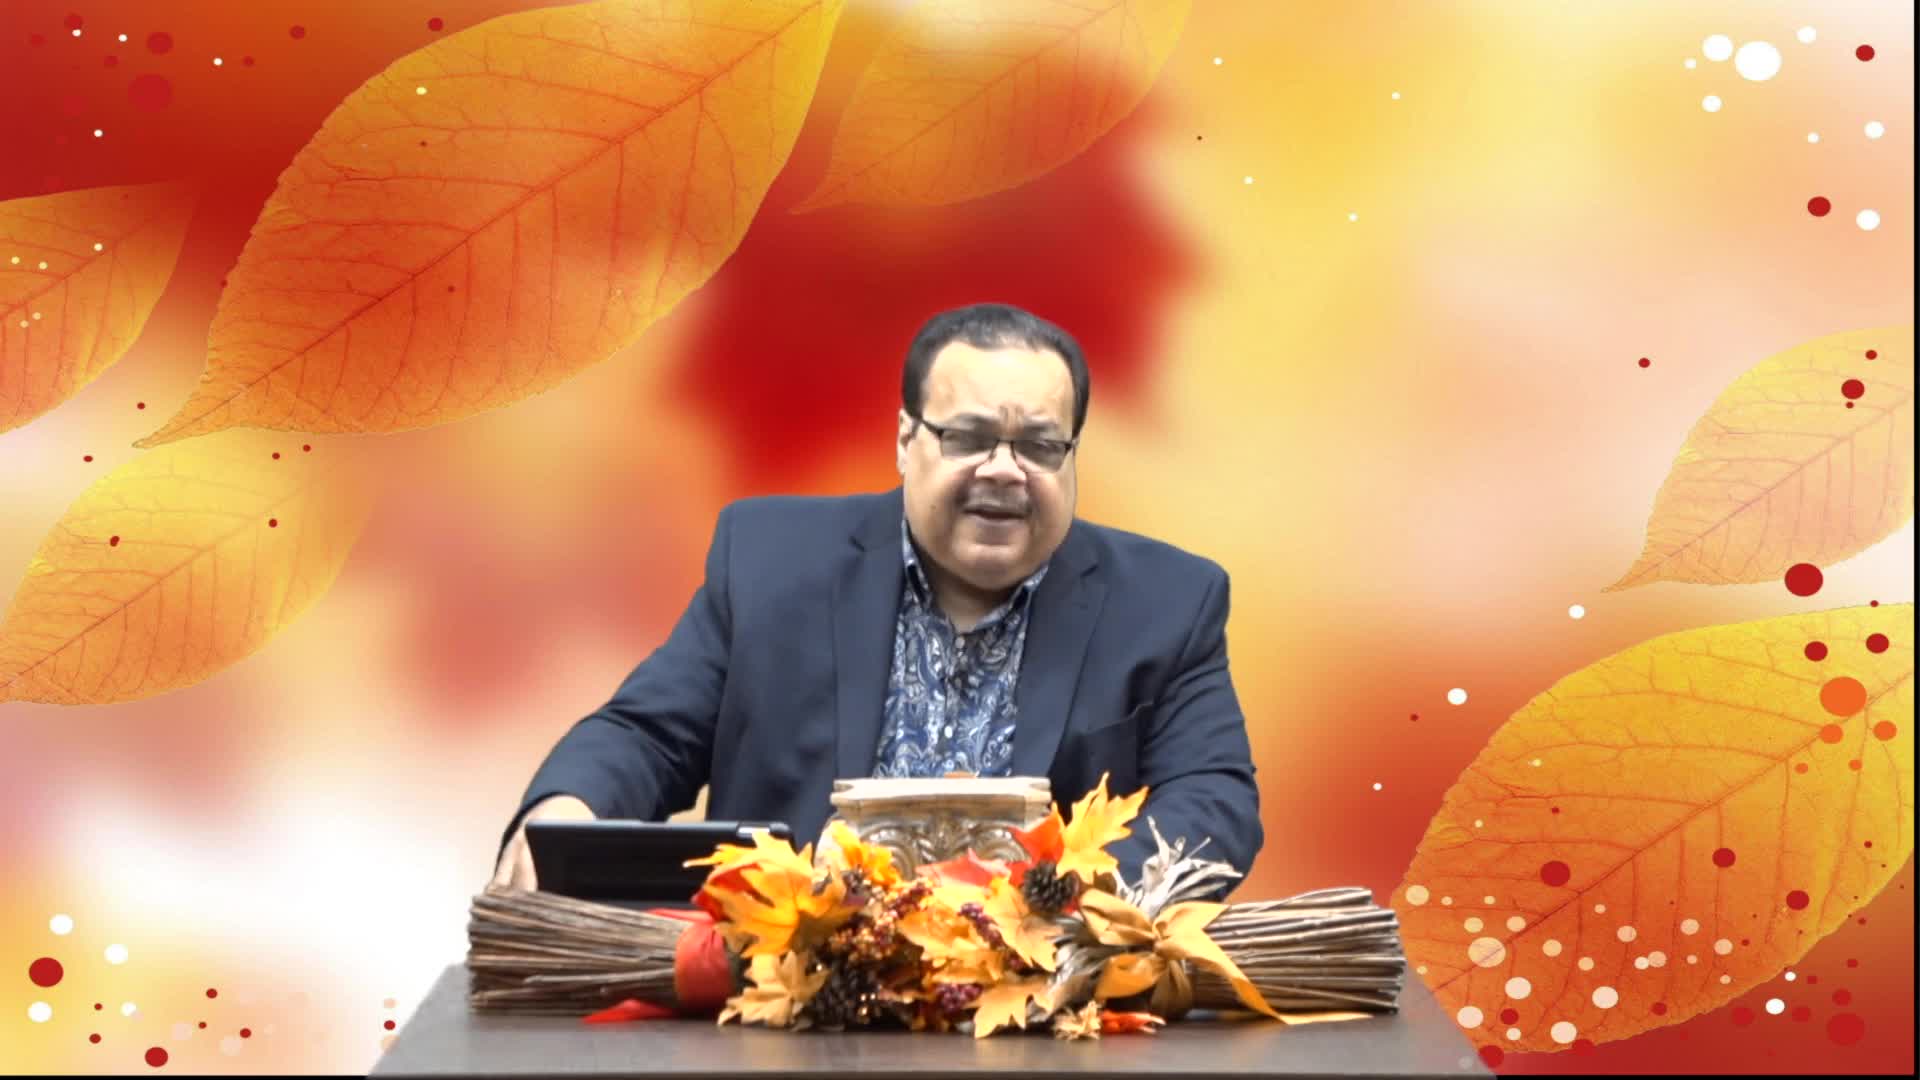 How to Reset Your Spiritual Life- Dr. Joseph Ripley, Sr.-Wed. Oct.13th, 2021@7:30PM